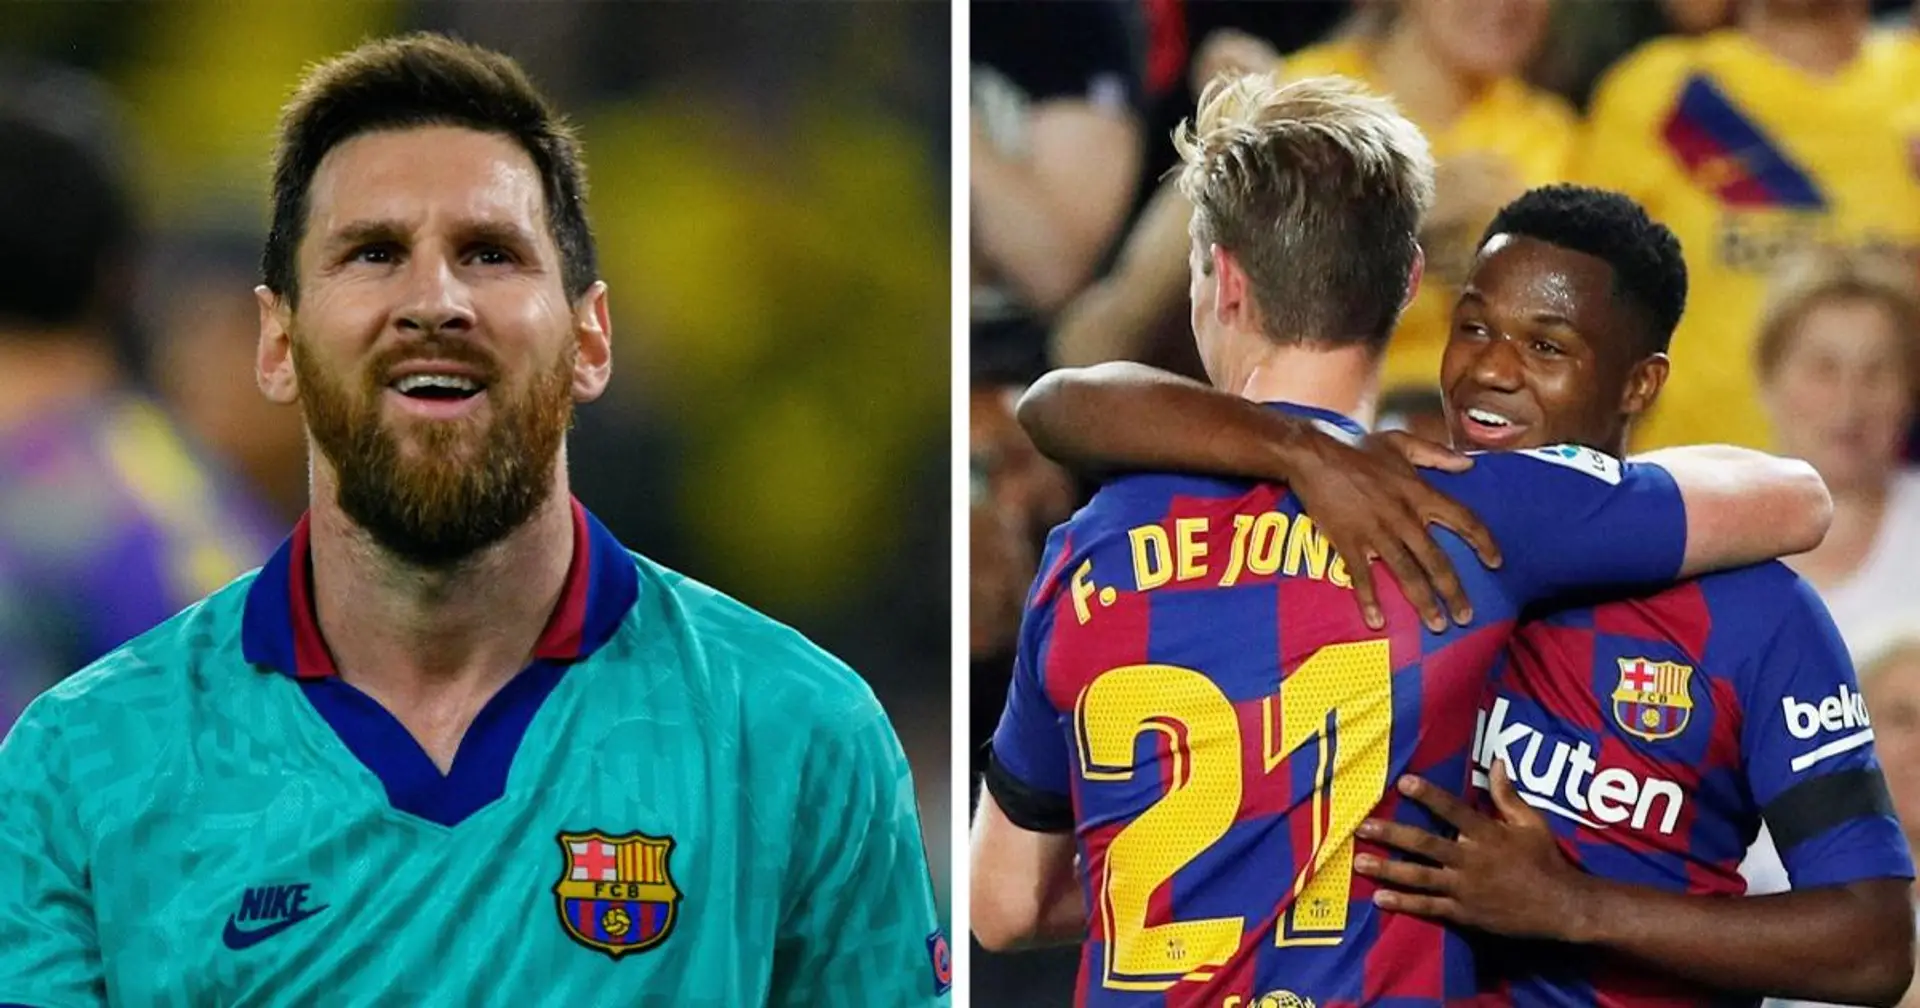 Barca's first season without Messi: How to prepare for it and what to expect